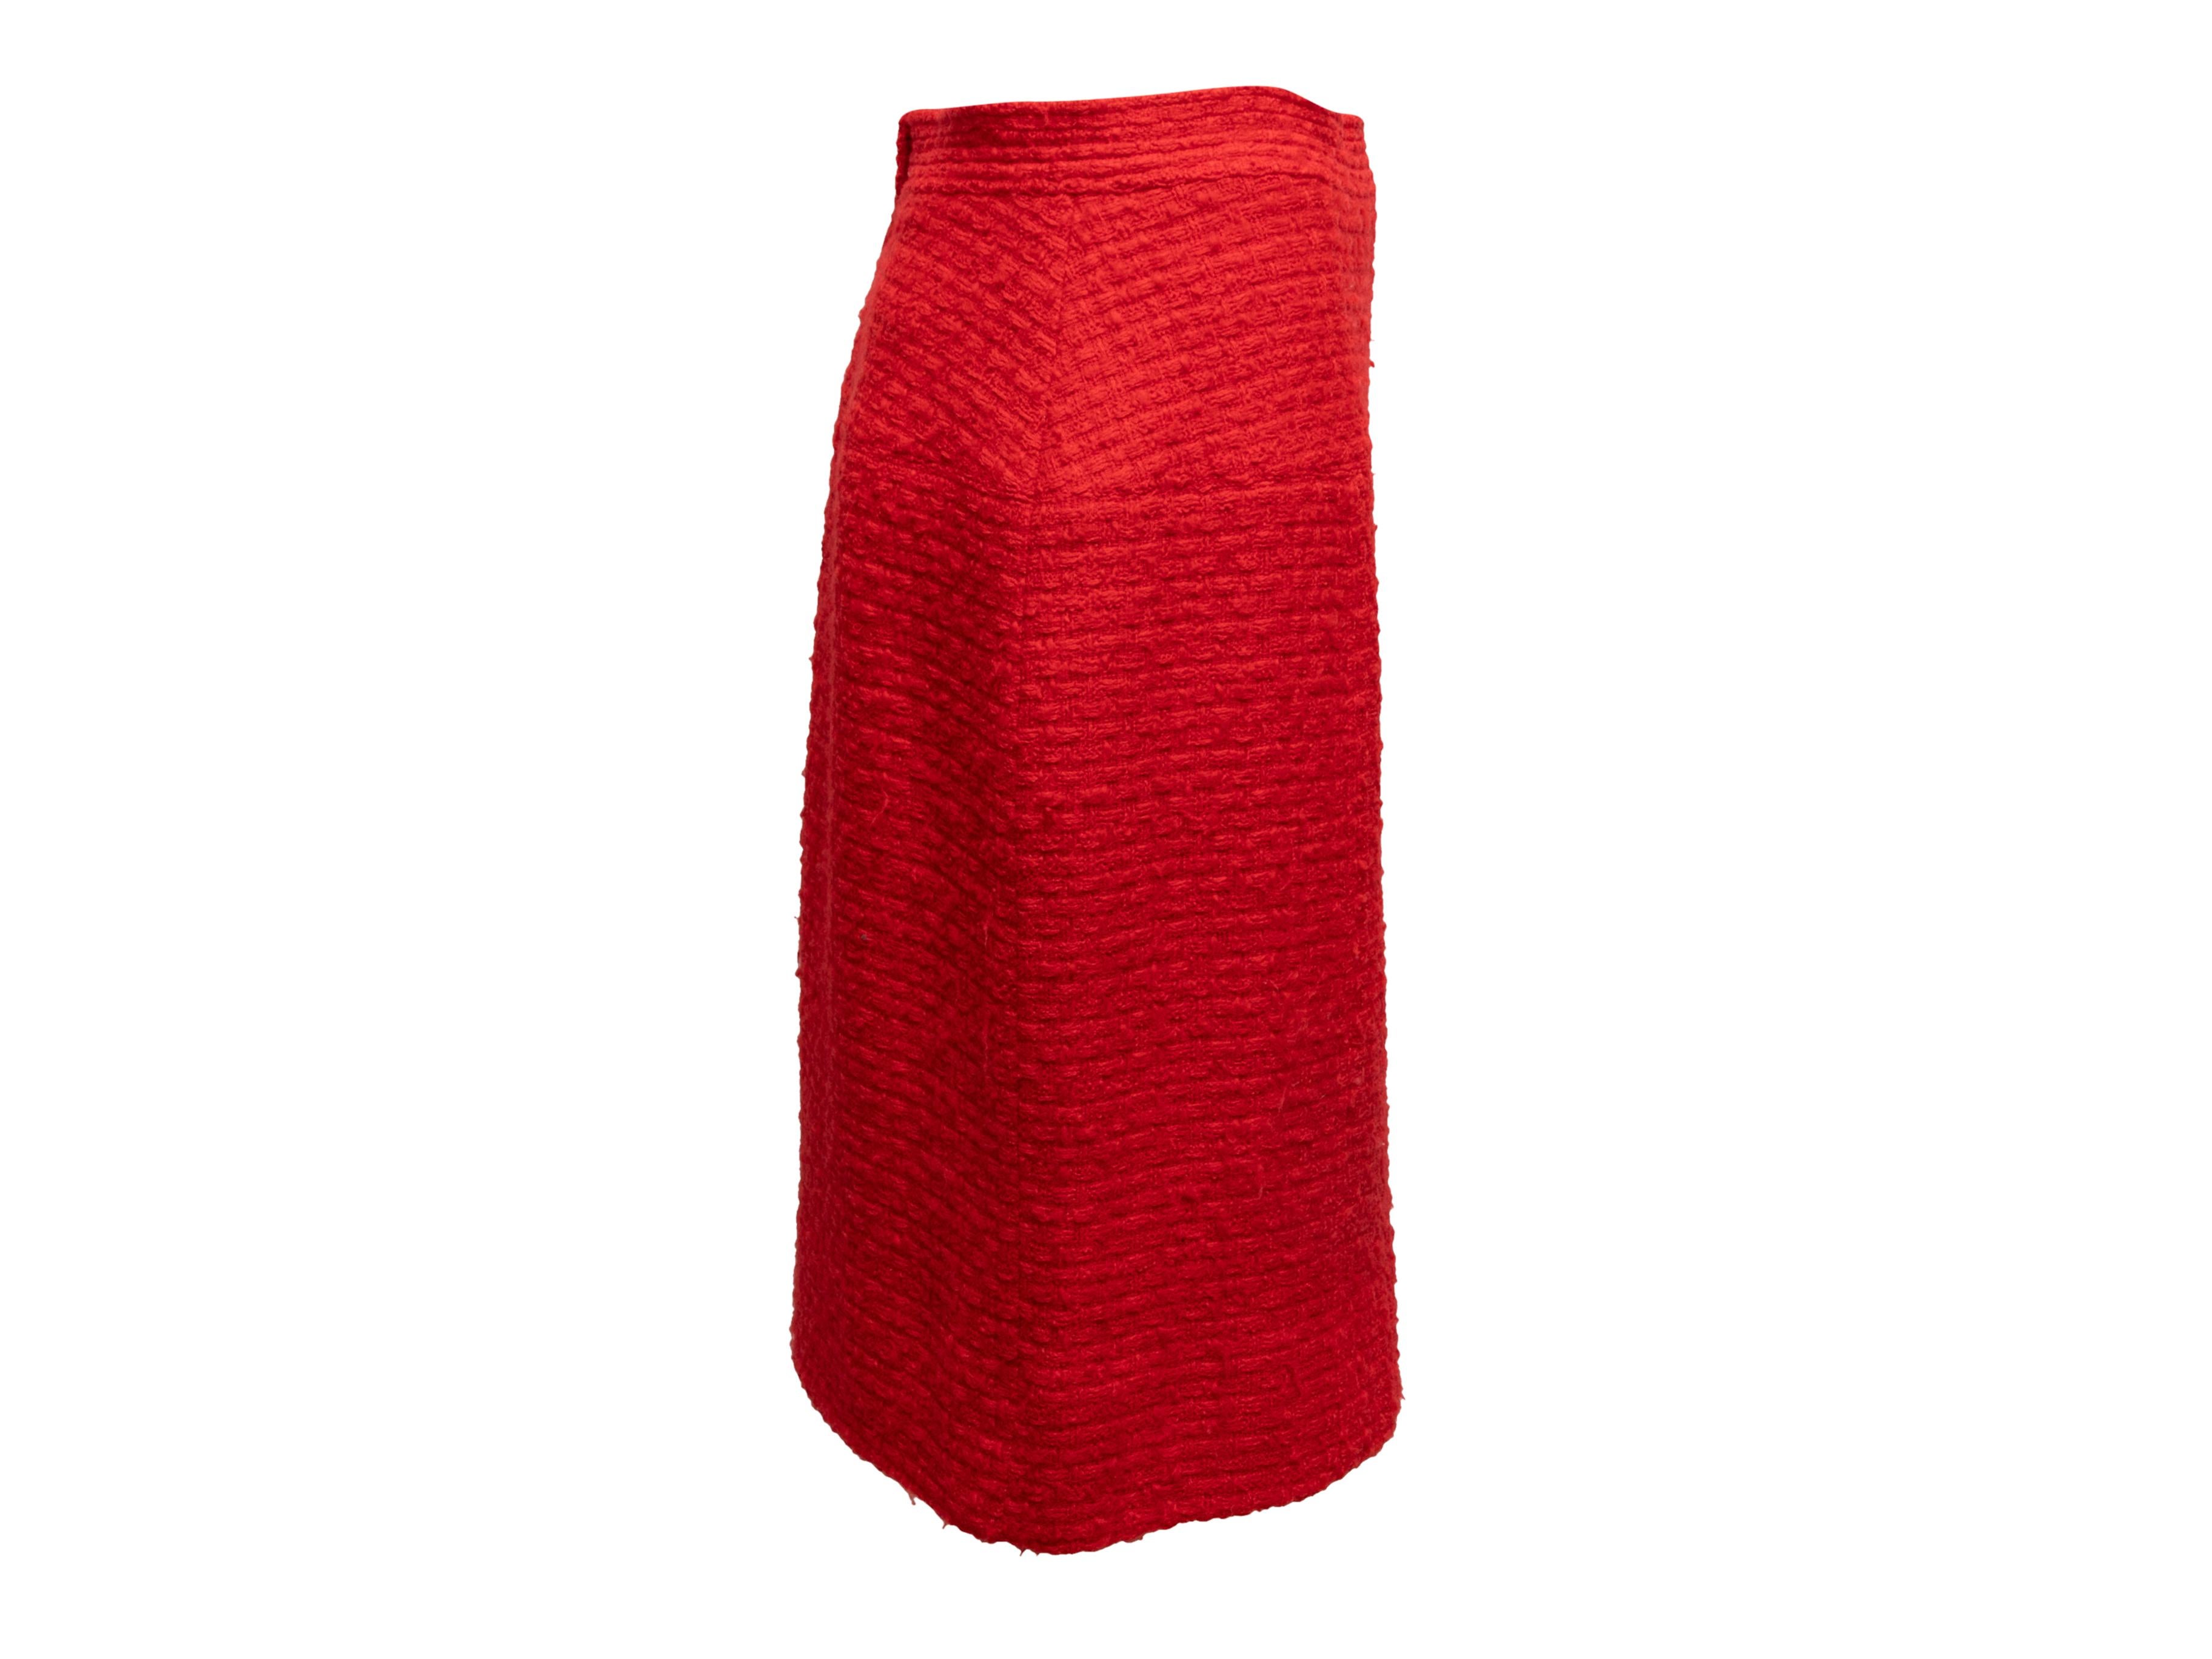 Vintage Red Chanel Boutique Tweed Pencil Skirt Size S In Good Condition For Sale In New York, NY